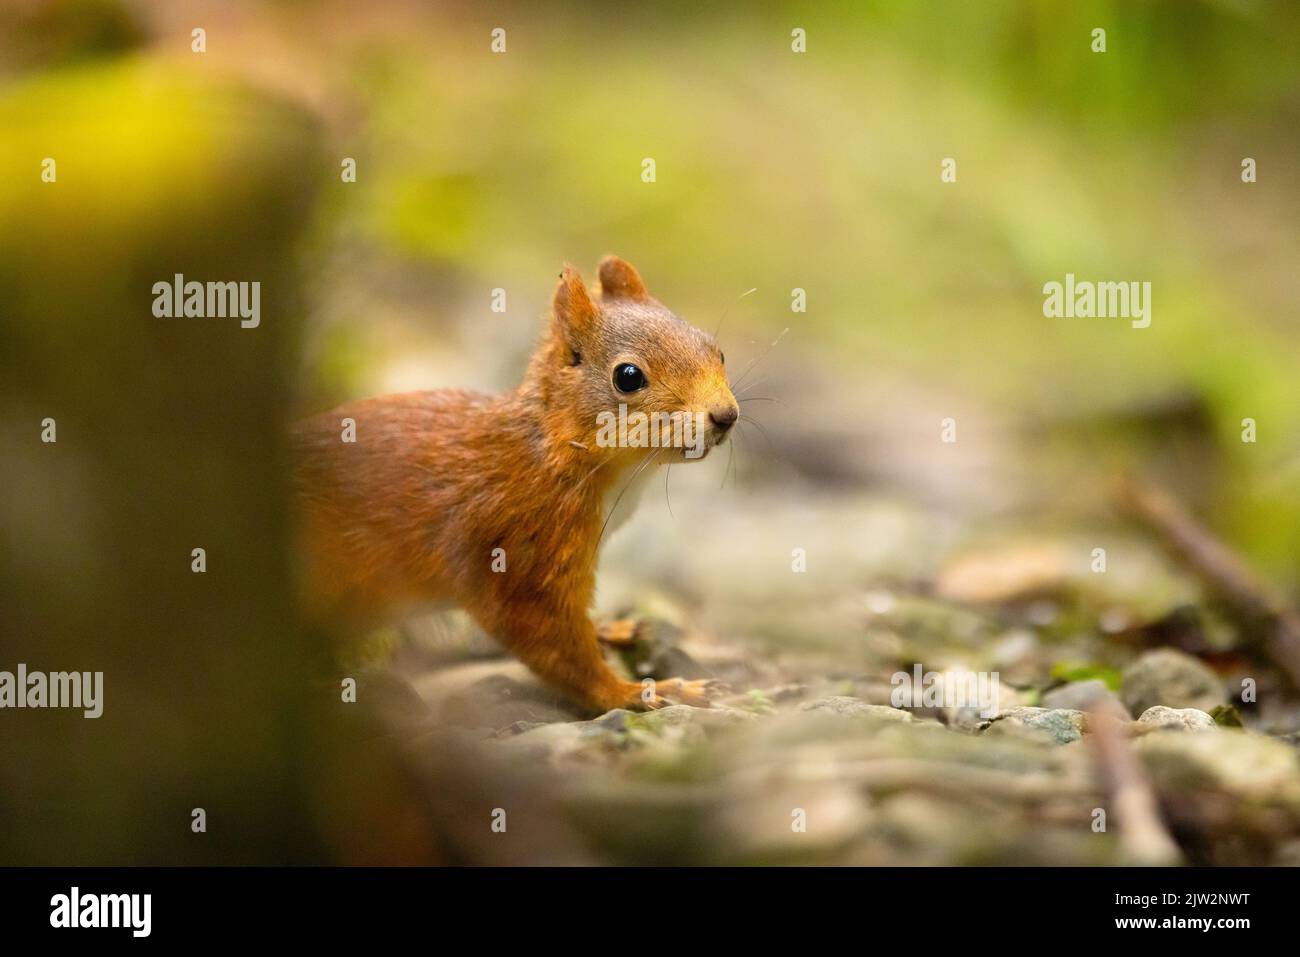 Curious red squirrel standing at the forest floor Stock Photo